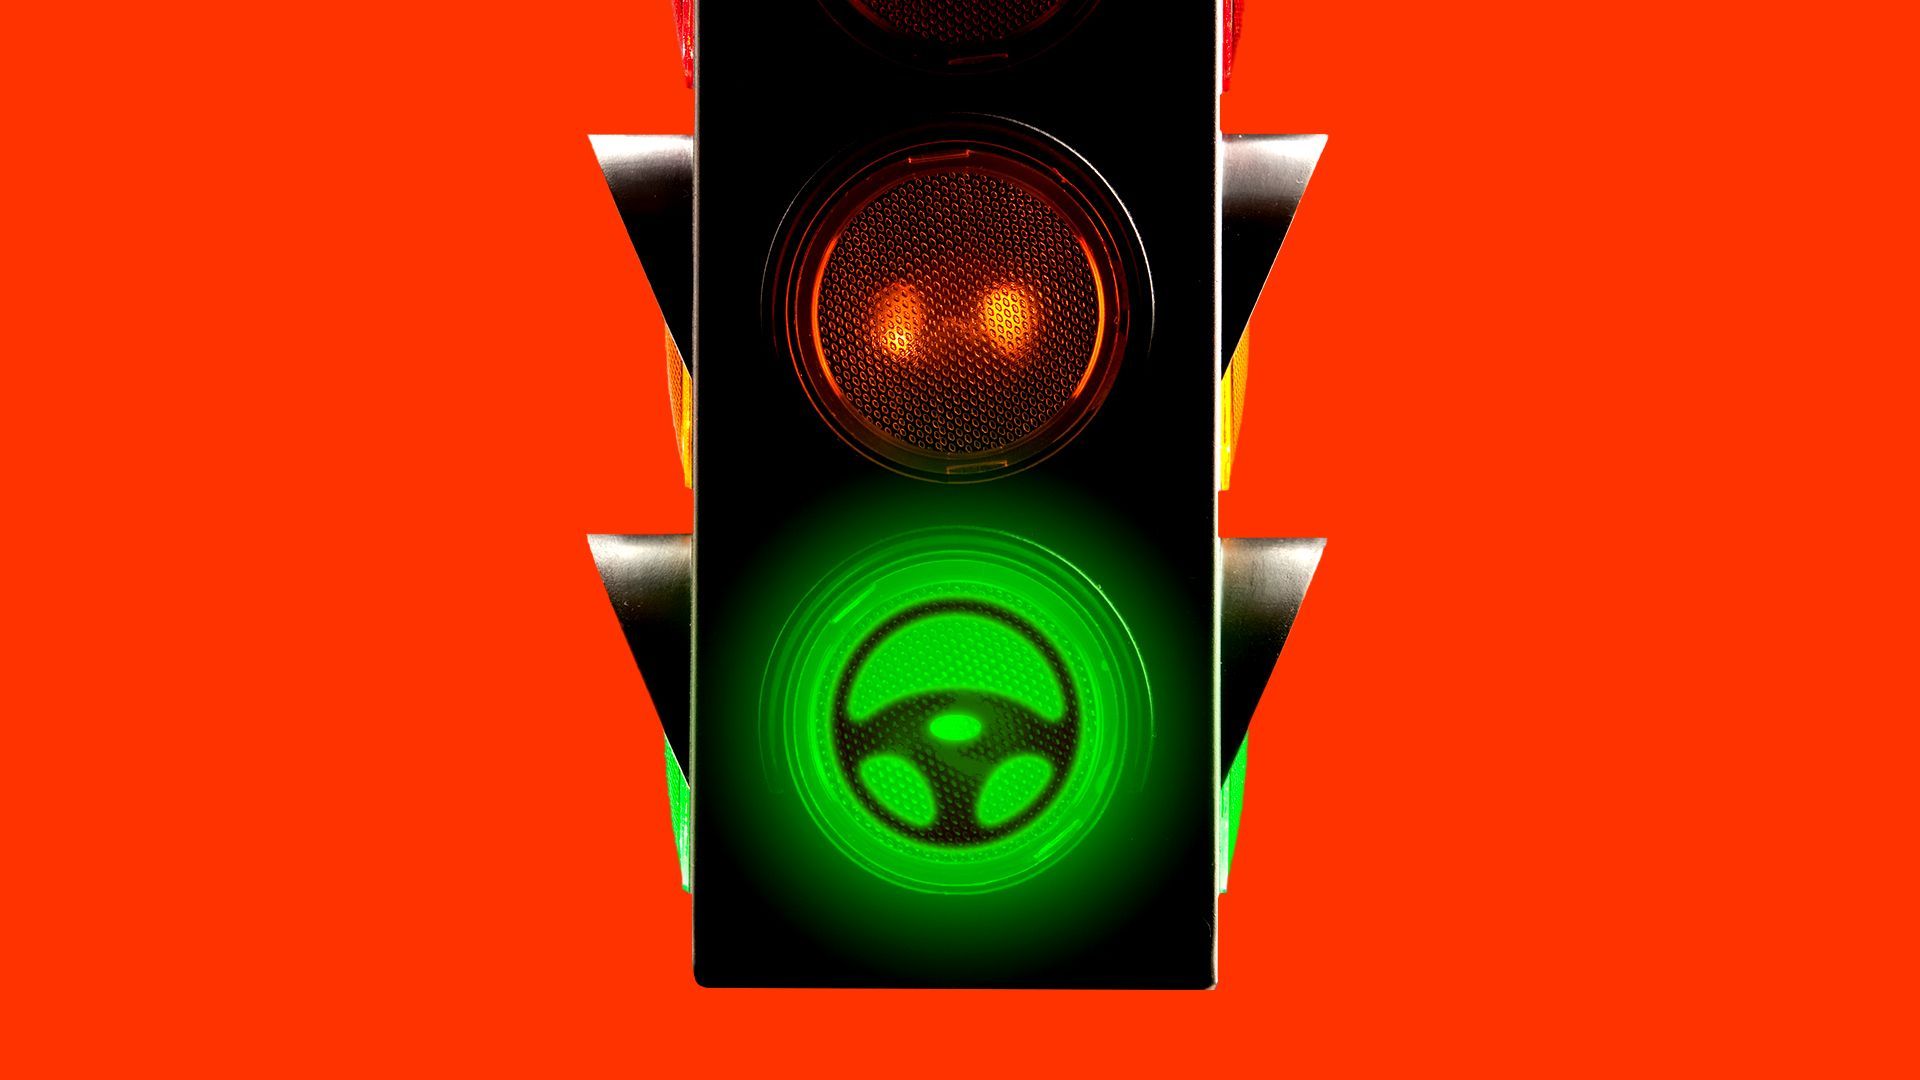 Illustration of a traffic light with a green light revealing a steering wheel